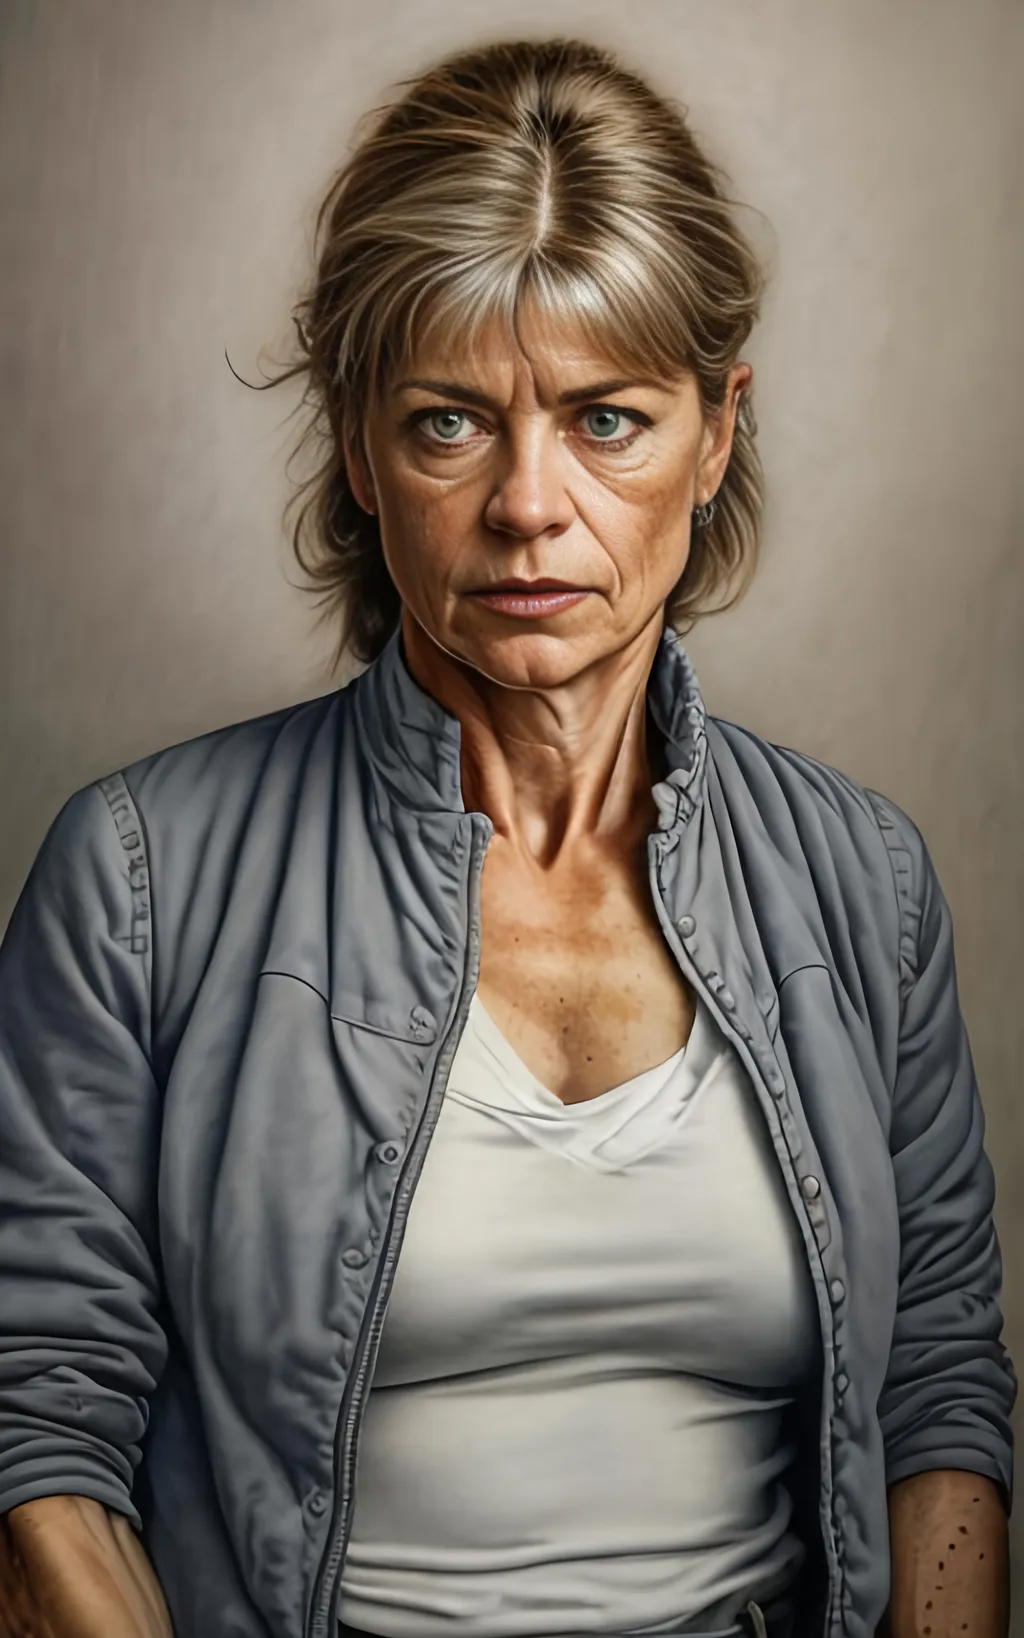 Prompt: create a highly detailed colored pencil drawing  standing portrait on grey paper, in the style of Norman Rockwell, Tsutomu Nihei and Steve Hanks. Every detail is meticulously captured, in HDR (High Dynamic Range), UHD (Ultra High Definition), and 1080p. Linda Hamilton in her 20s, portraying the 20 year old Sarah Conner in the drama tv movie "Terminator." use costumes from the tv movie. T-800 terminator robots.

use all best practices in art and design to produce what would be recognized as a master work art piece. use accurate perspective and foreshortening. use atmospheric perspective. create expressive faces and use dramatic lighting. fur coat and fur hat.


Linda Hamilton aged to her 20s, portraying Sarah Conner develops from a timid damsel in distress victim in the first film to a wanted fugitive committing acts of terrorism, a hardened warrior and mother who sacrificed everything for her son's future, on the verge of losing touch with her own humanity, and a mentor preparing and protecting a protégée for her destiny. portray her in her 20s wearing army gear.